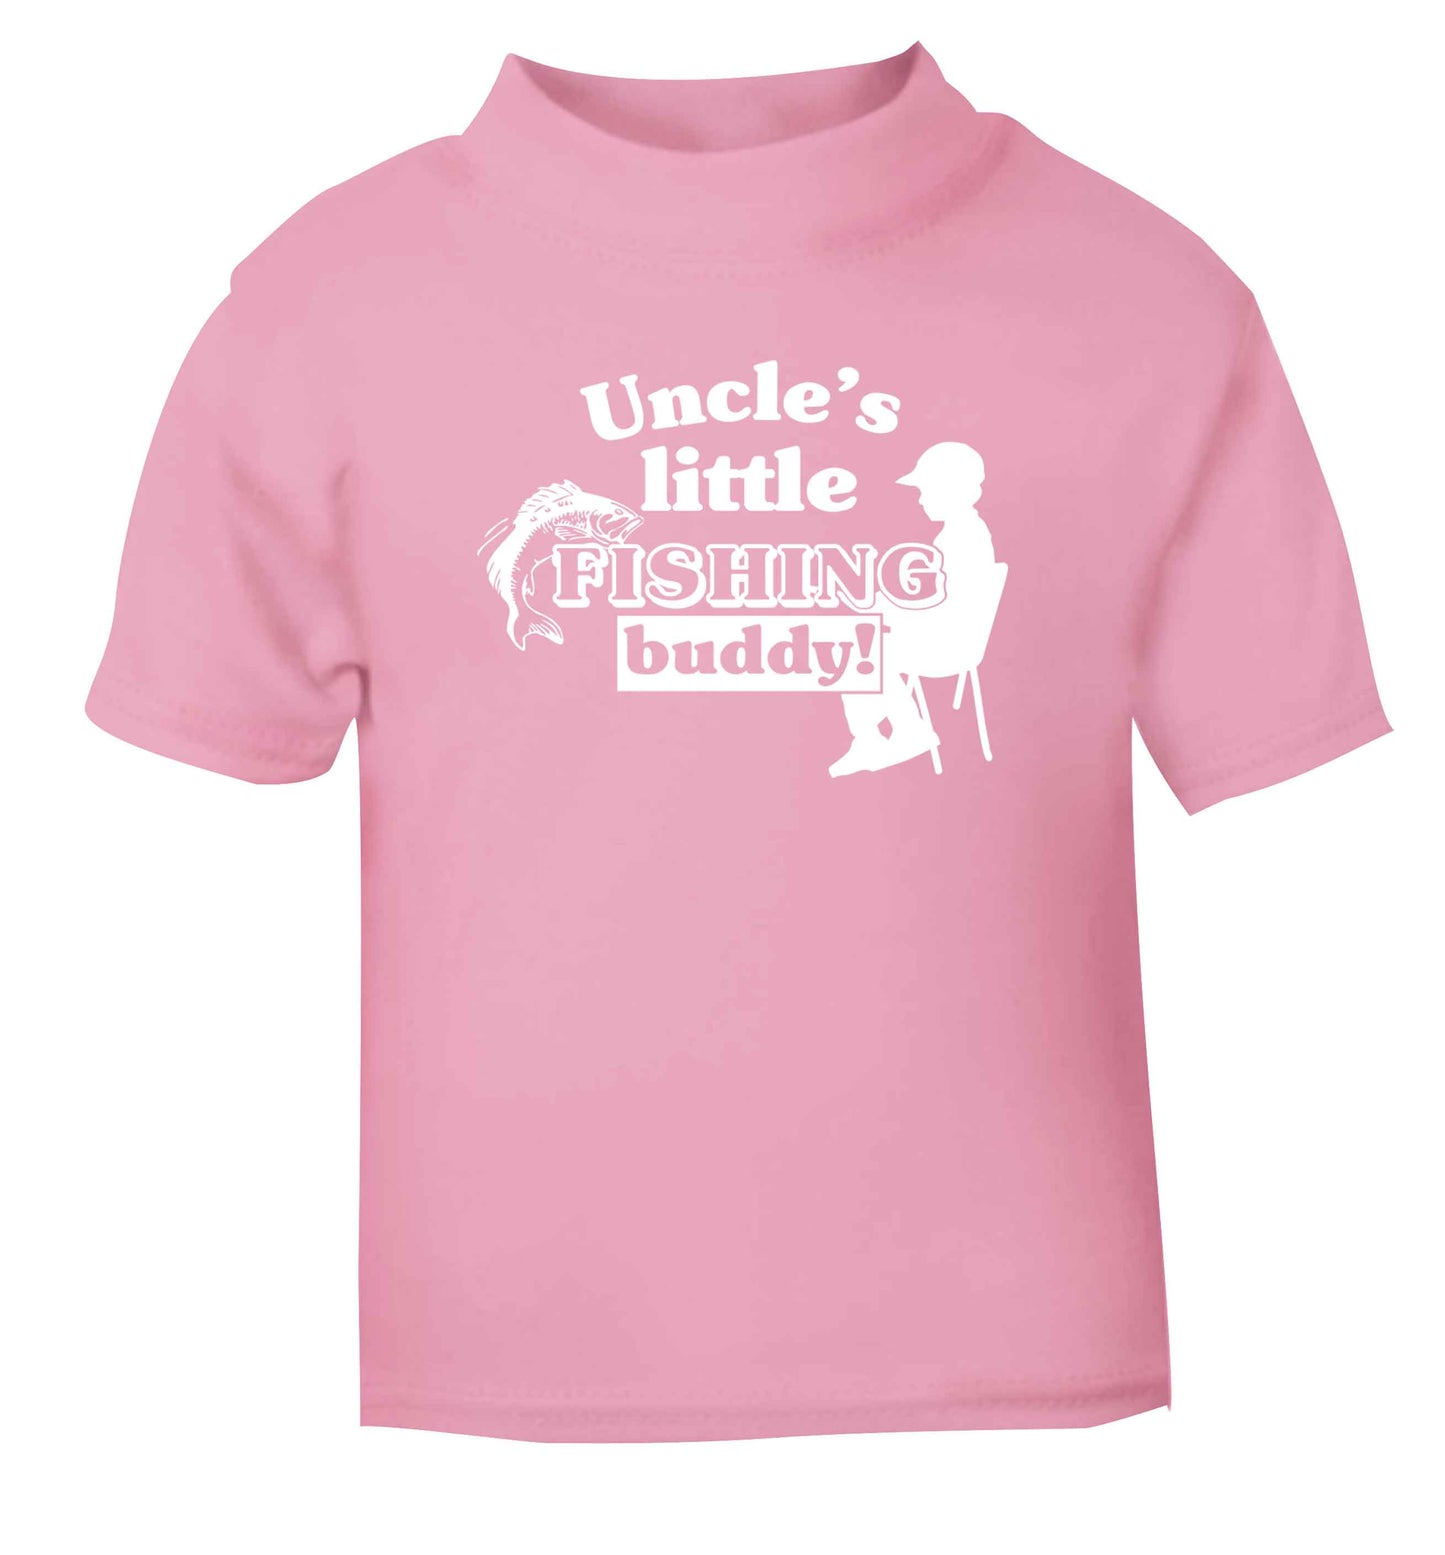 Uncle's little fishing buddy light pink Baby Toddler Tshirt 2 Years